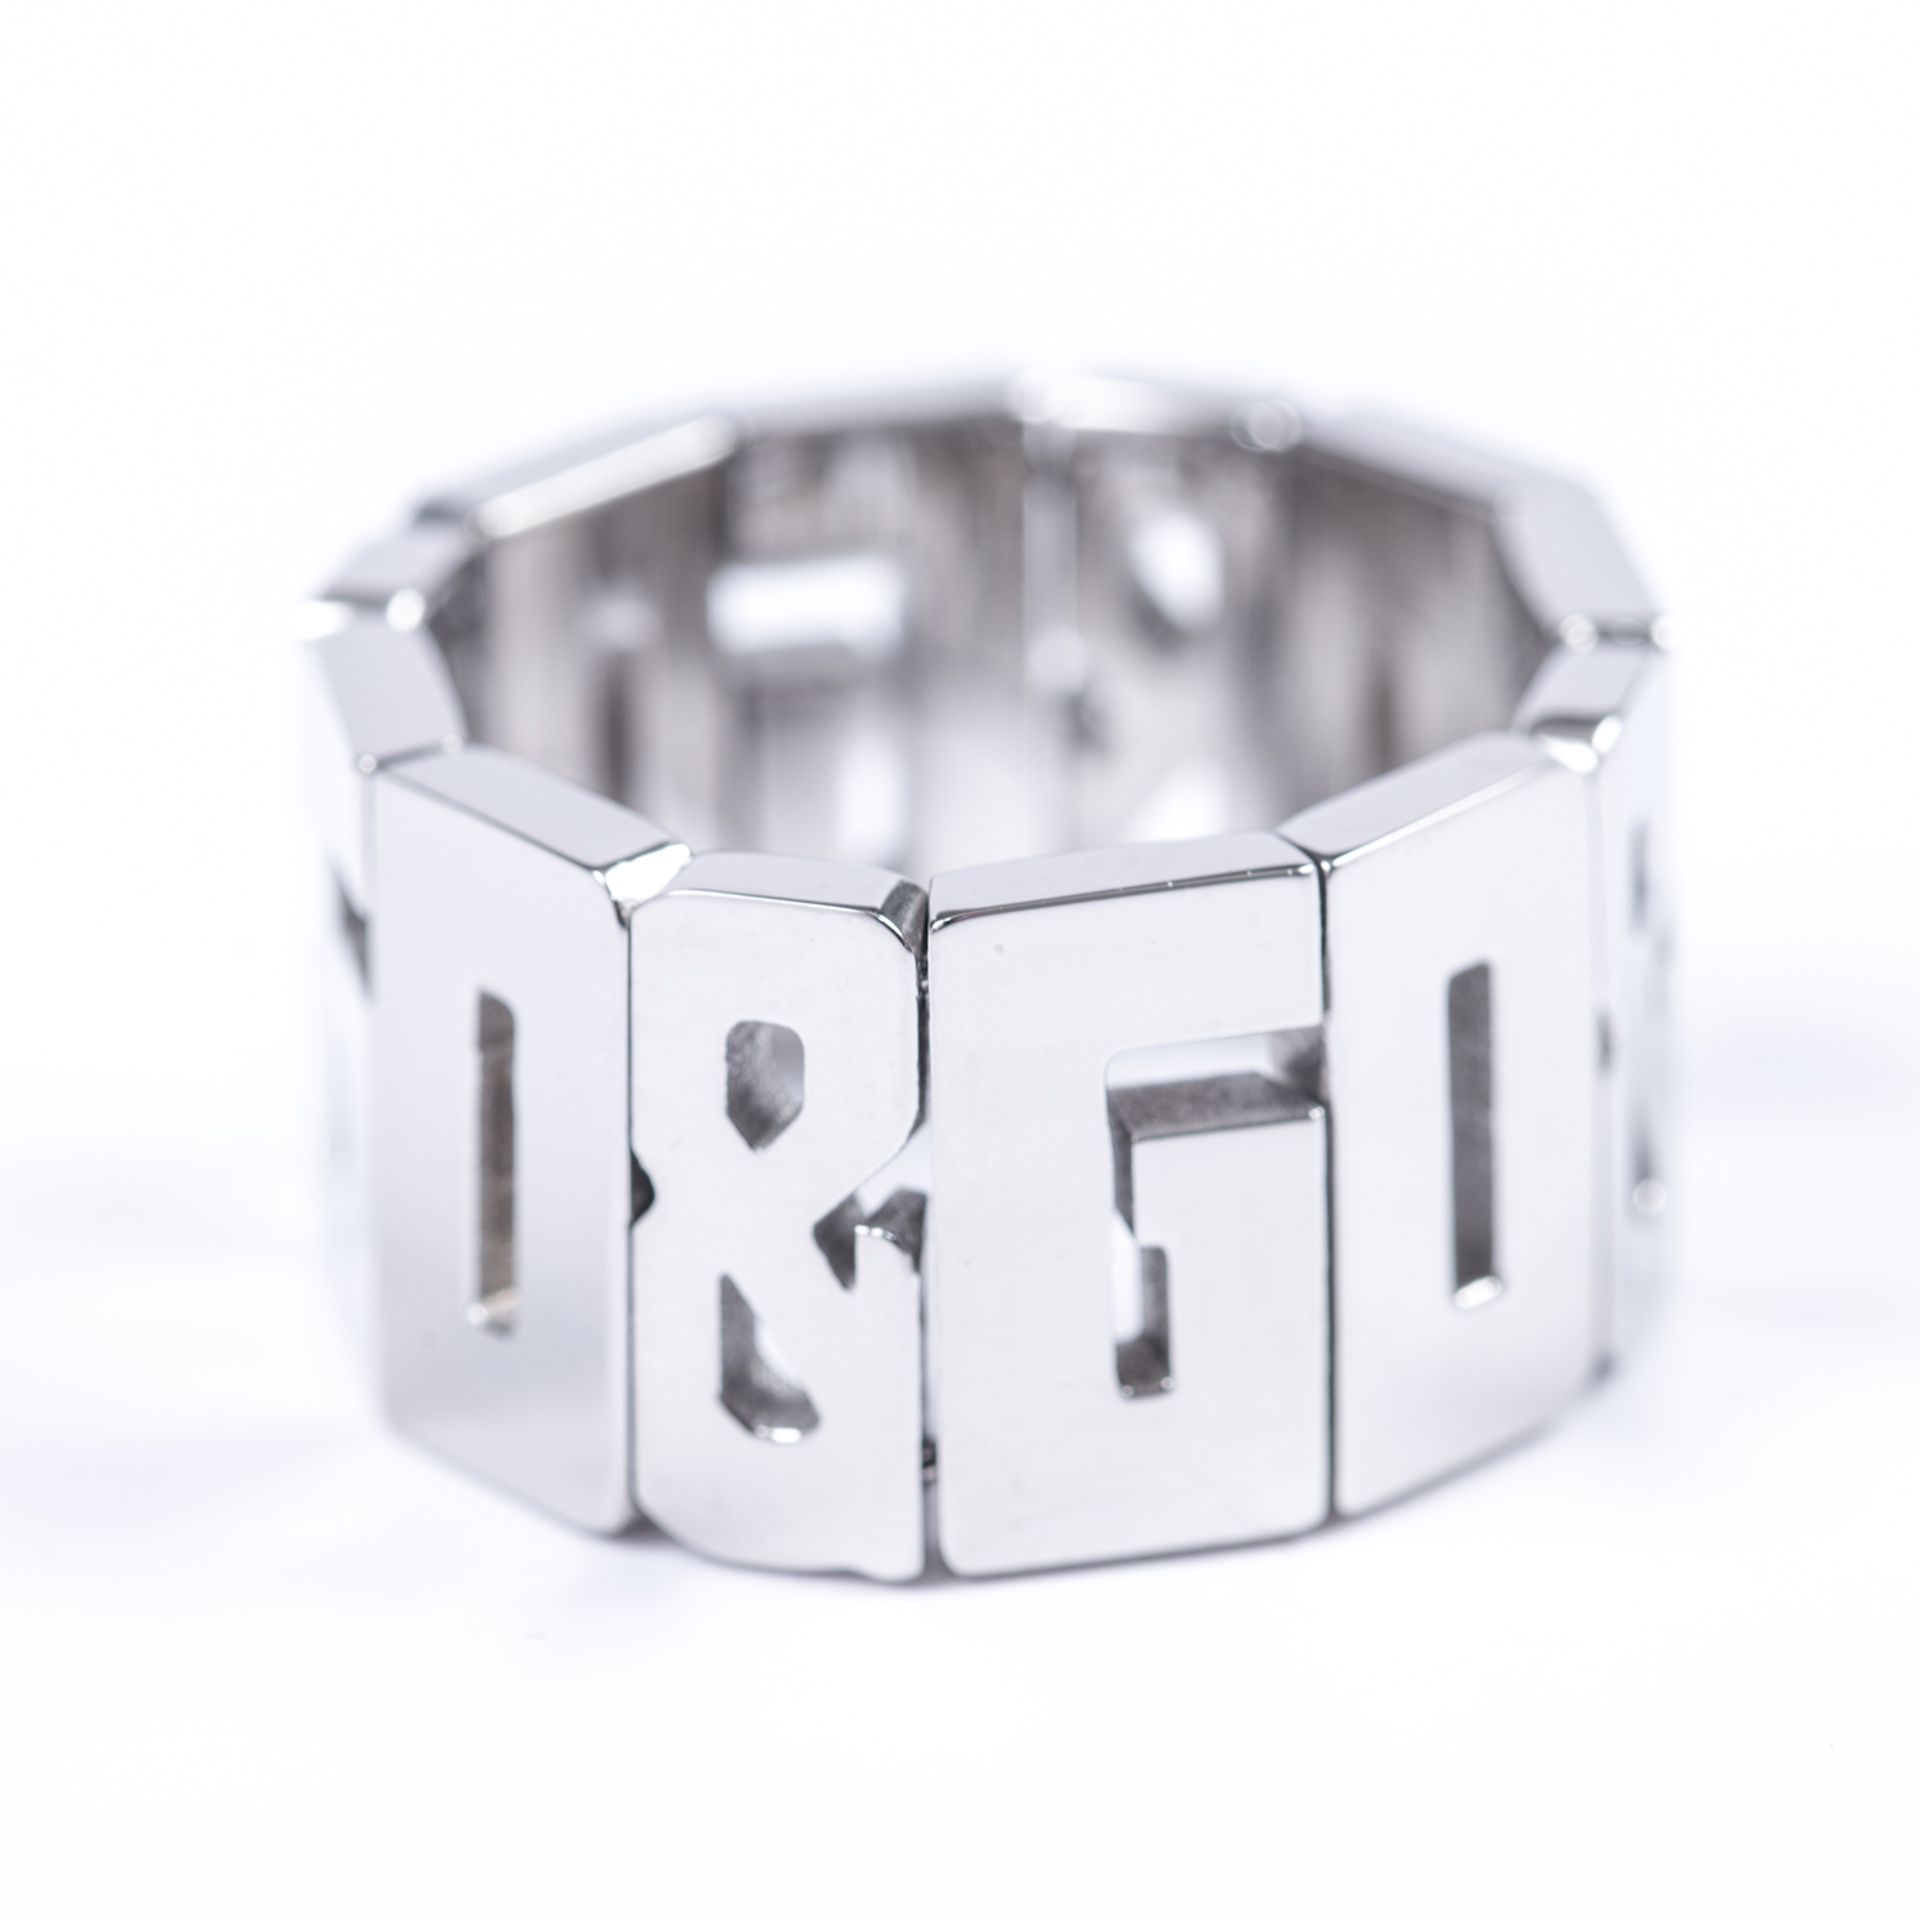 D&G Silver Flex Overlap Ring Size 19 (By D&G Jewels).RRP £129 - Brand New & Boxed